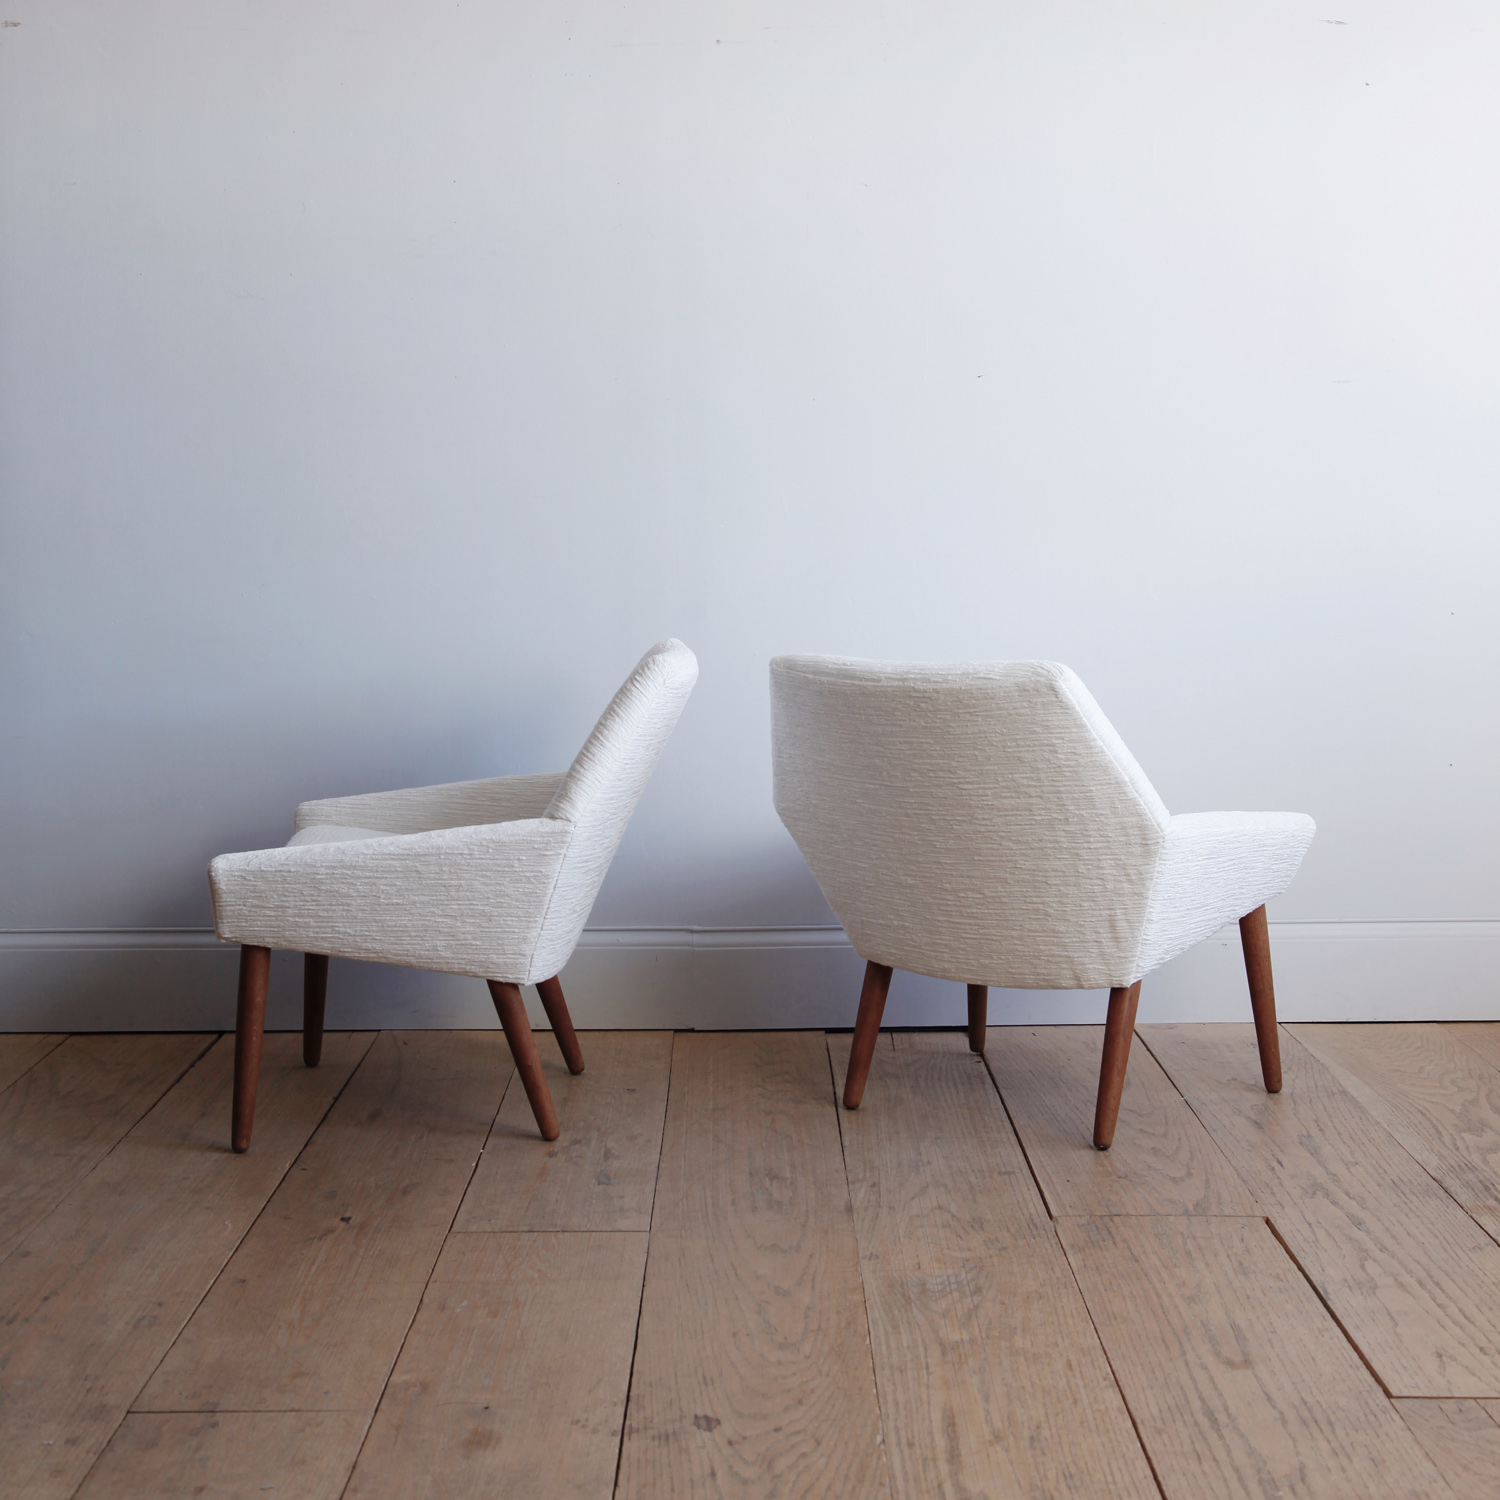 Pair of Danish Modern Lounge Chairs by Poul Thorsbjerg Jensen